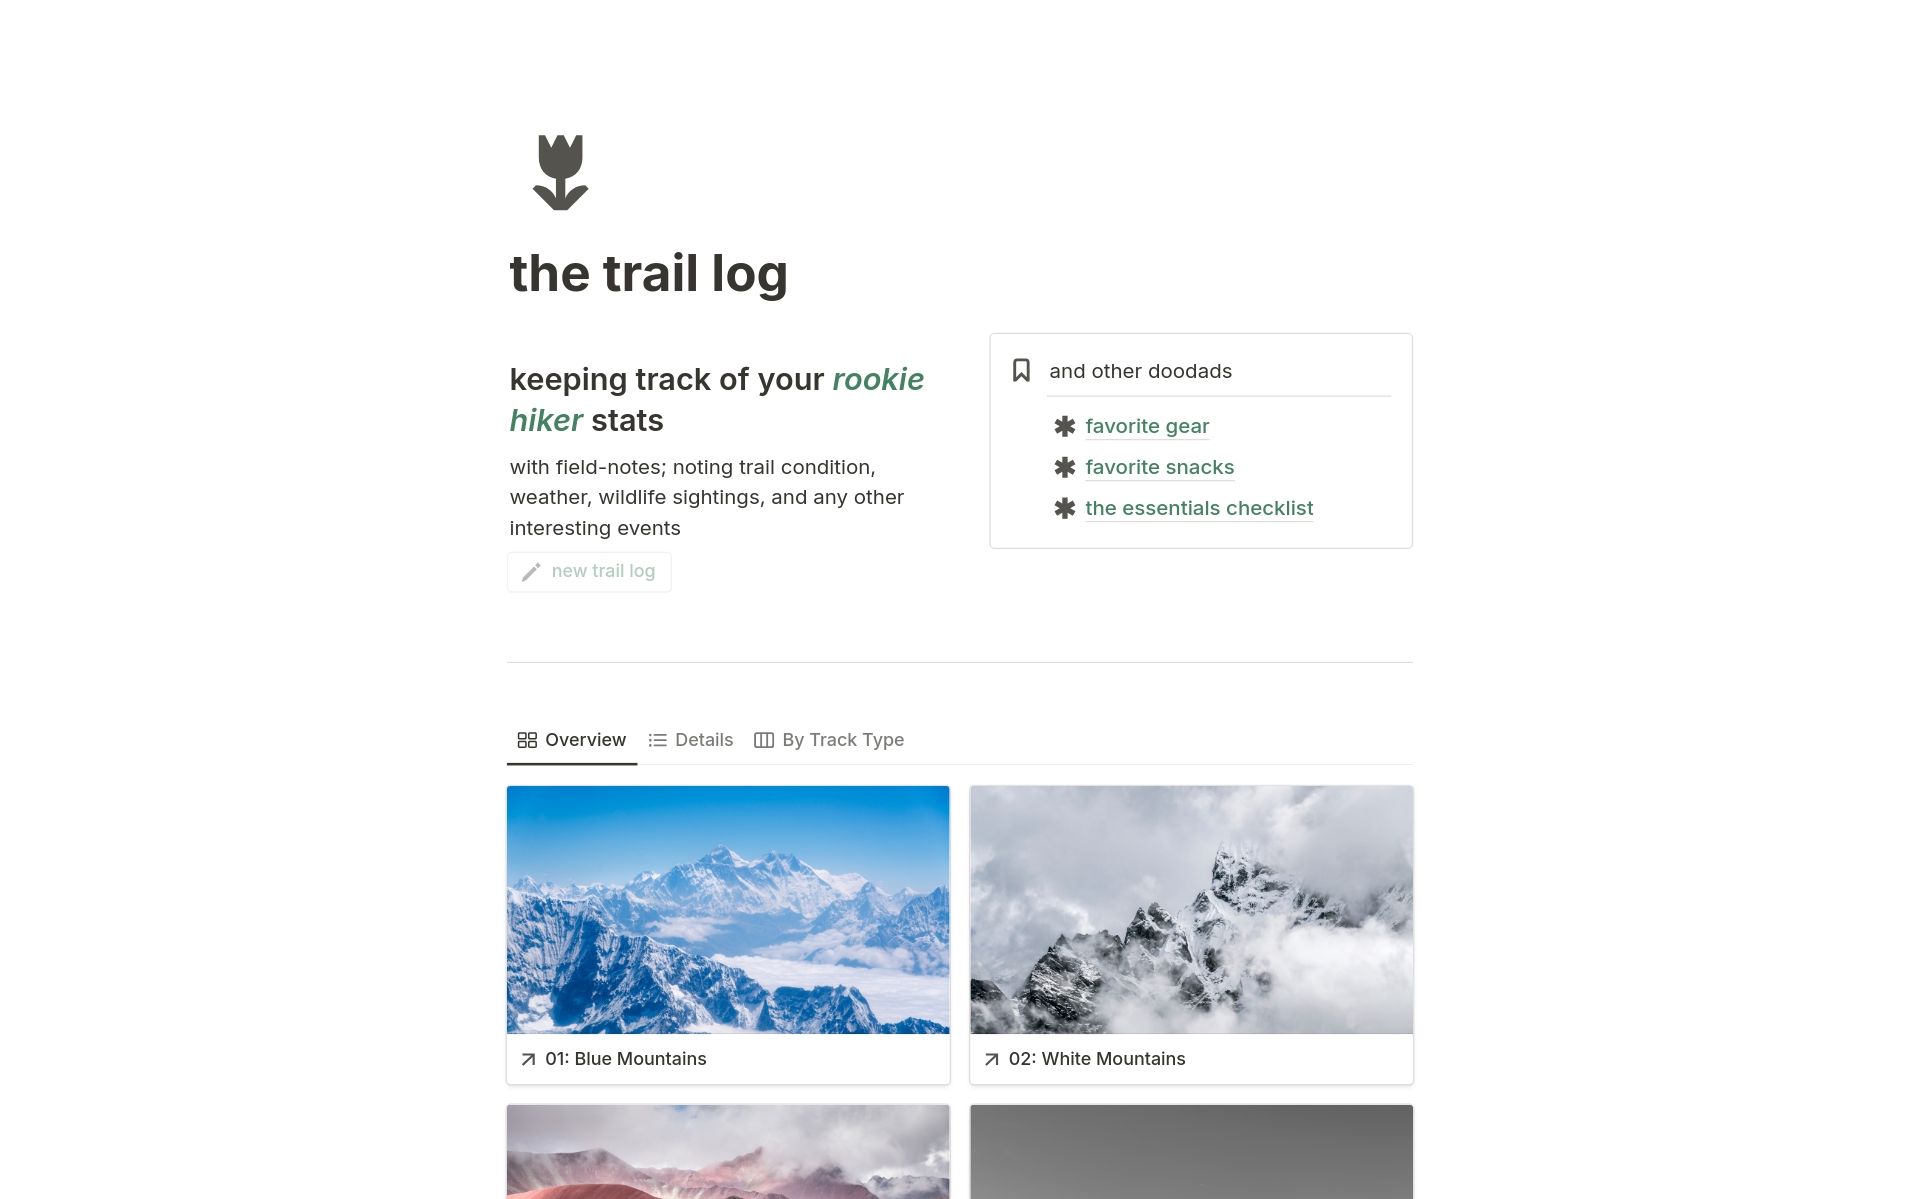 A fully-customizable Notion template for your rookie-hiker tracker needs. 

Simply tap the "new trail log" to begin logging in all the details of your hike from photos and summaries to details on your trail buddies, weather conditions, trail types, hike duration and so on.